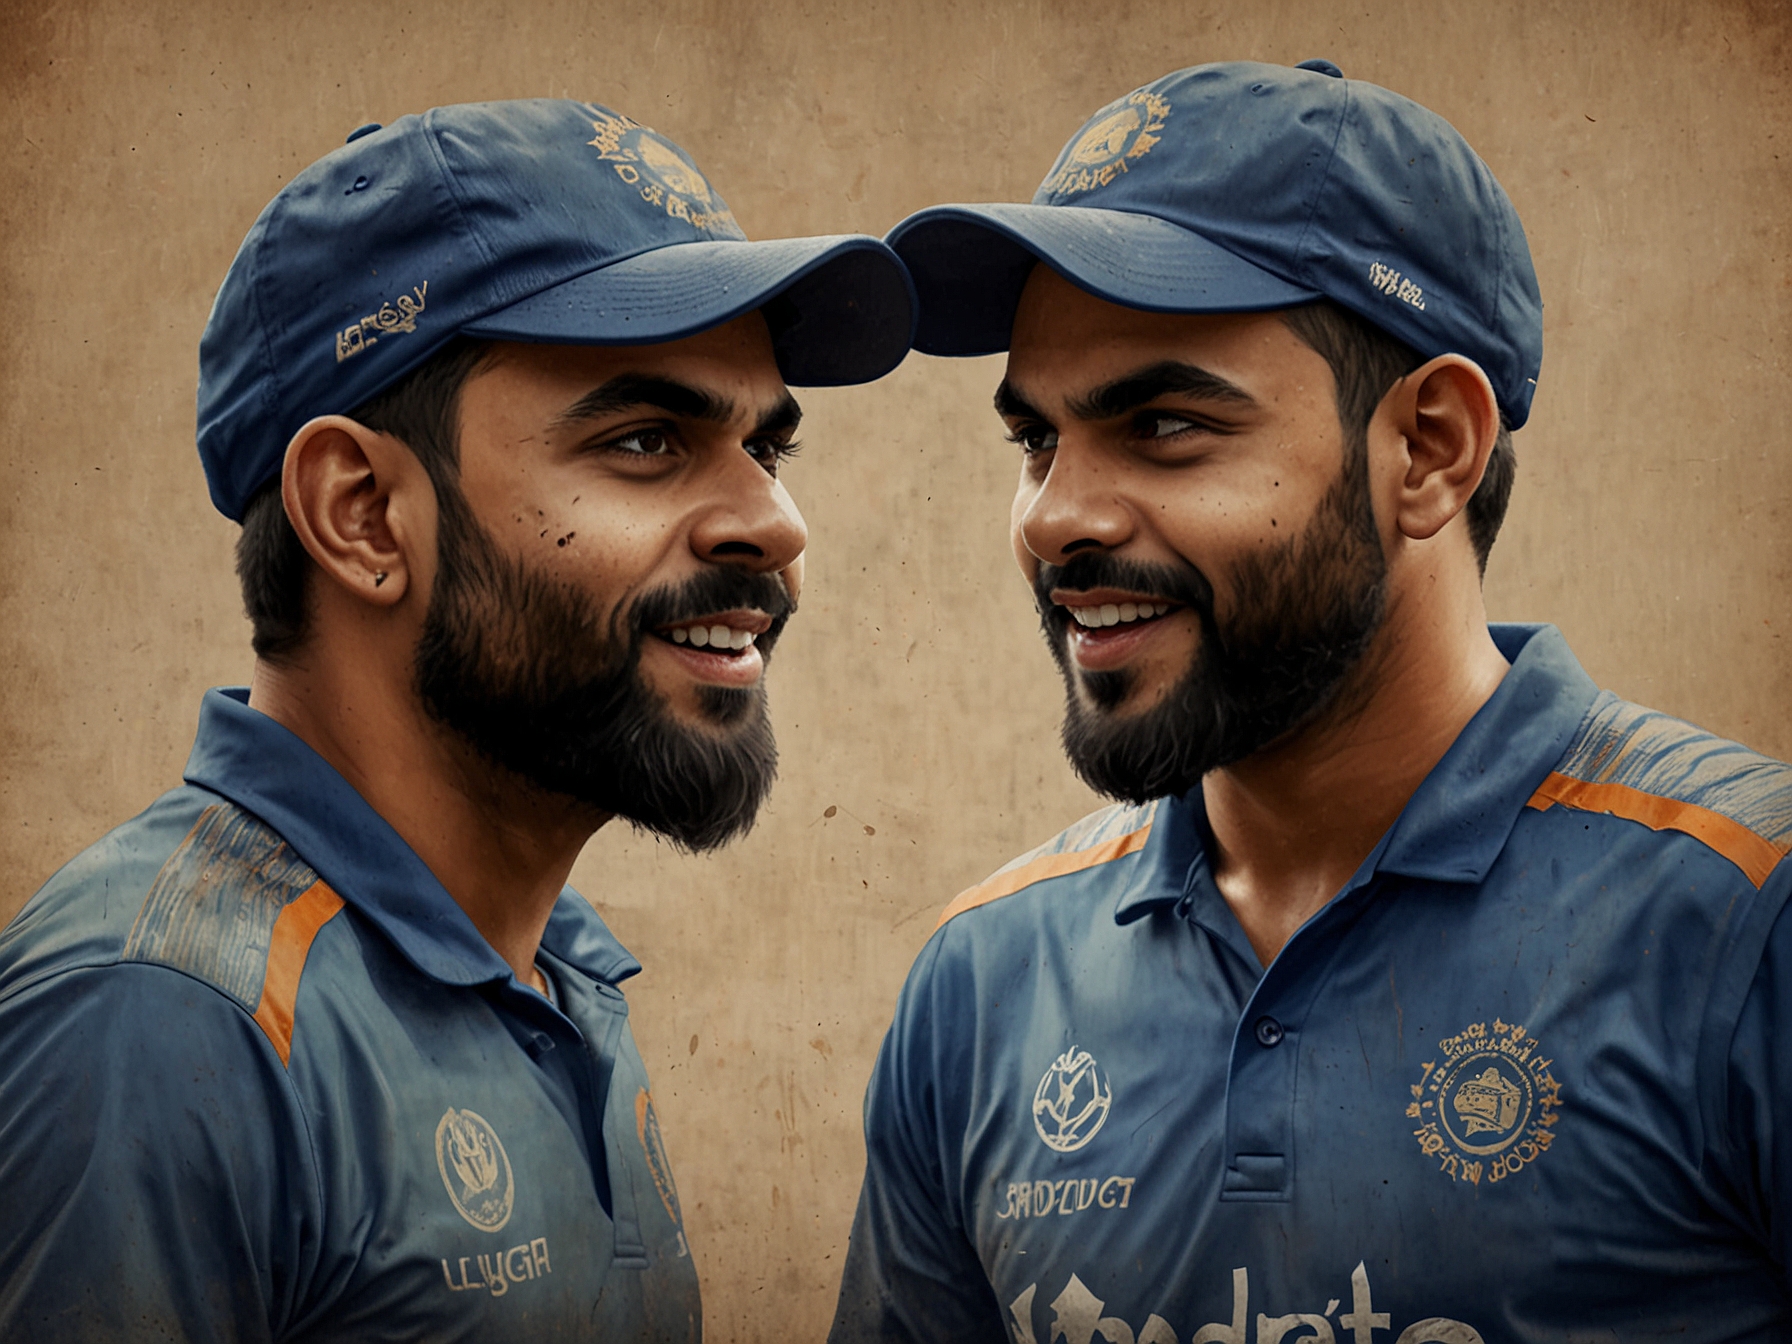 Virat Kohli and Rohit Sharma during a memorable T20 International match, showcasing their remarkable partnership and the camaraderie that led to numerous victories for India.